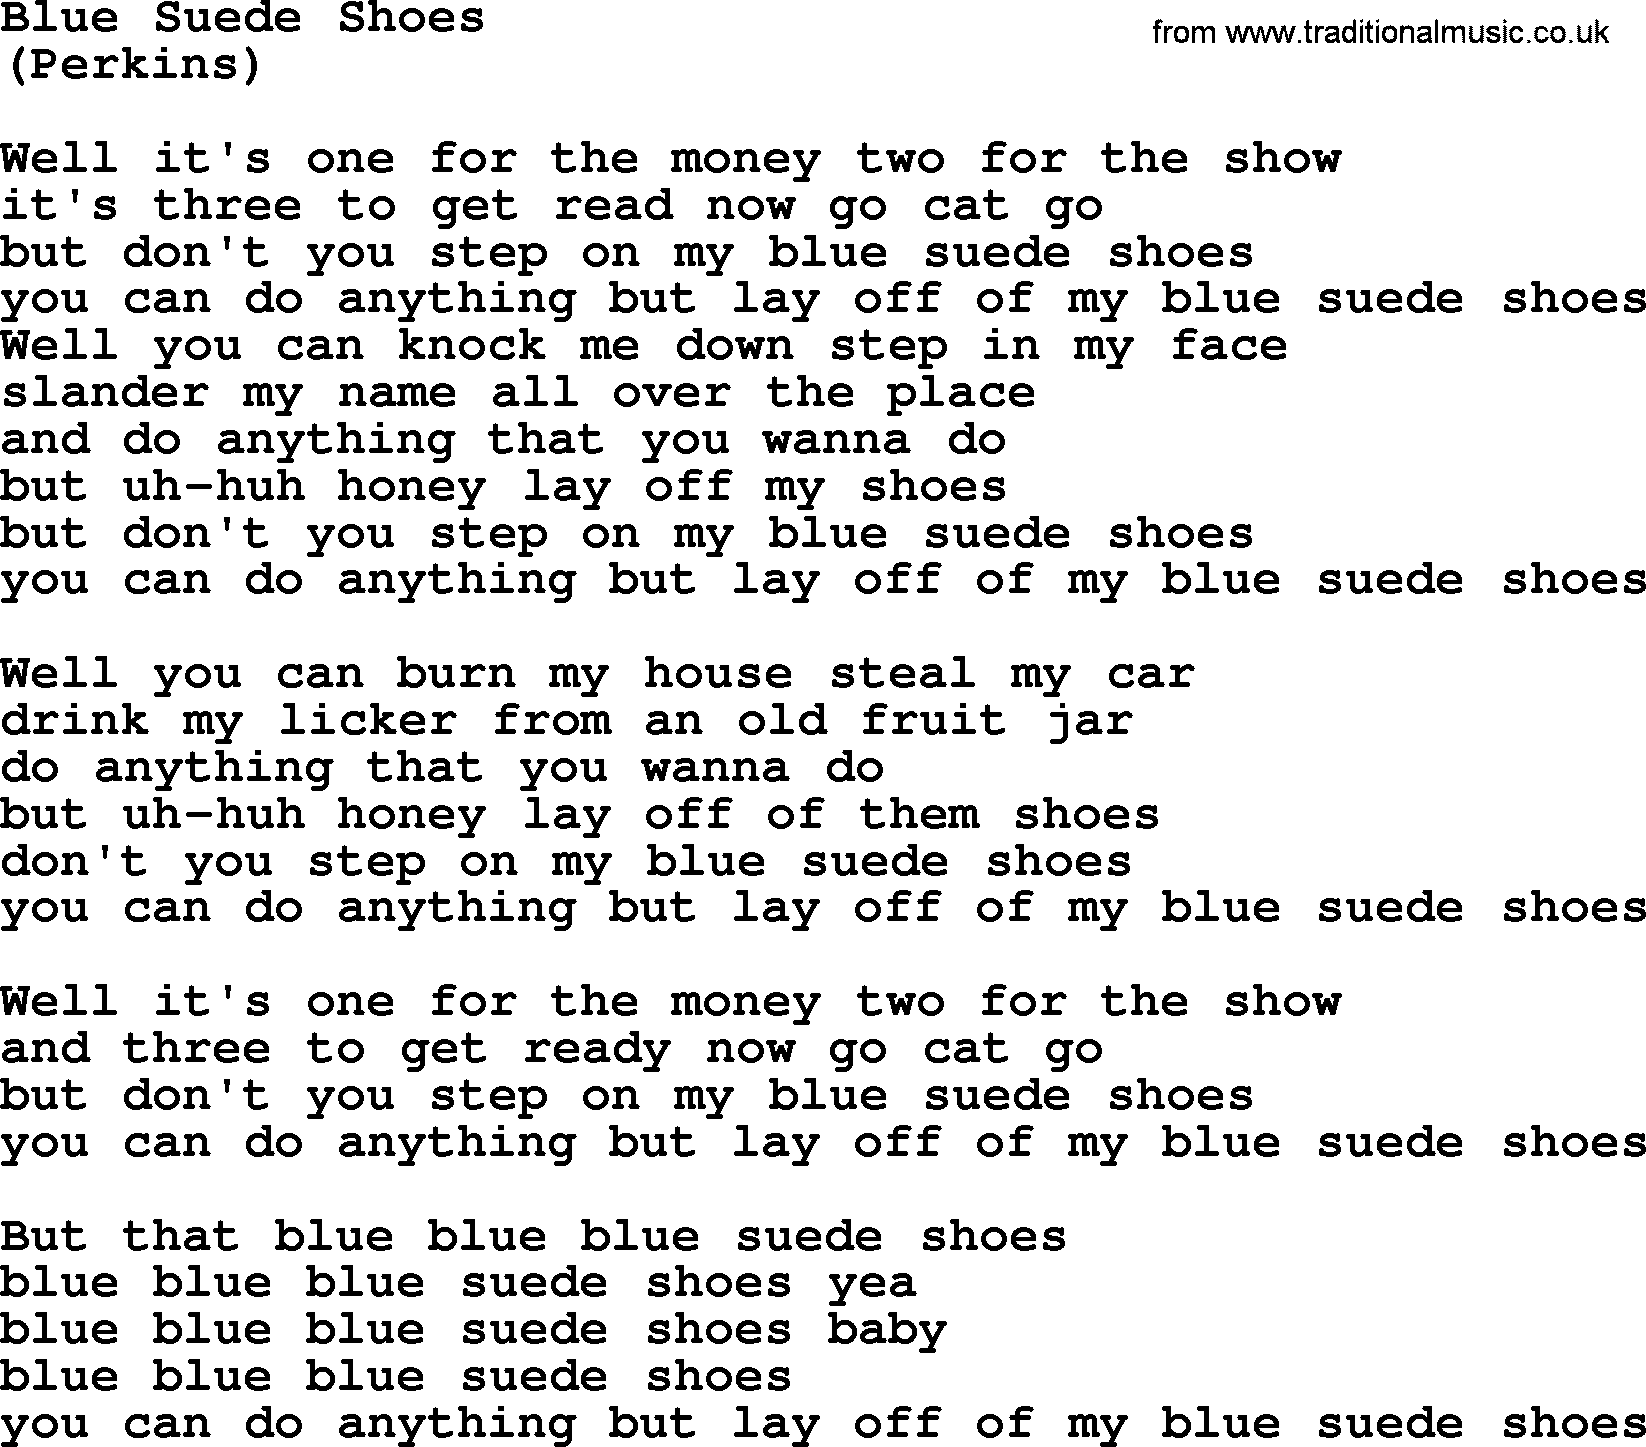 The Byrds song Blue Suede Shoes, lyrics